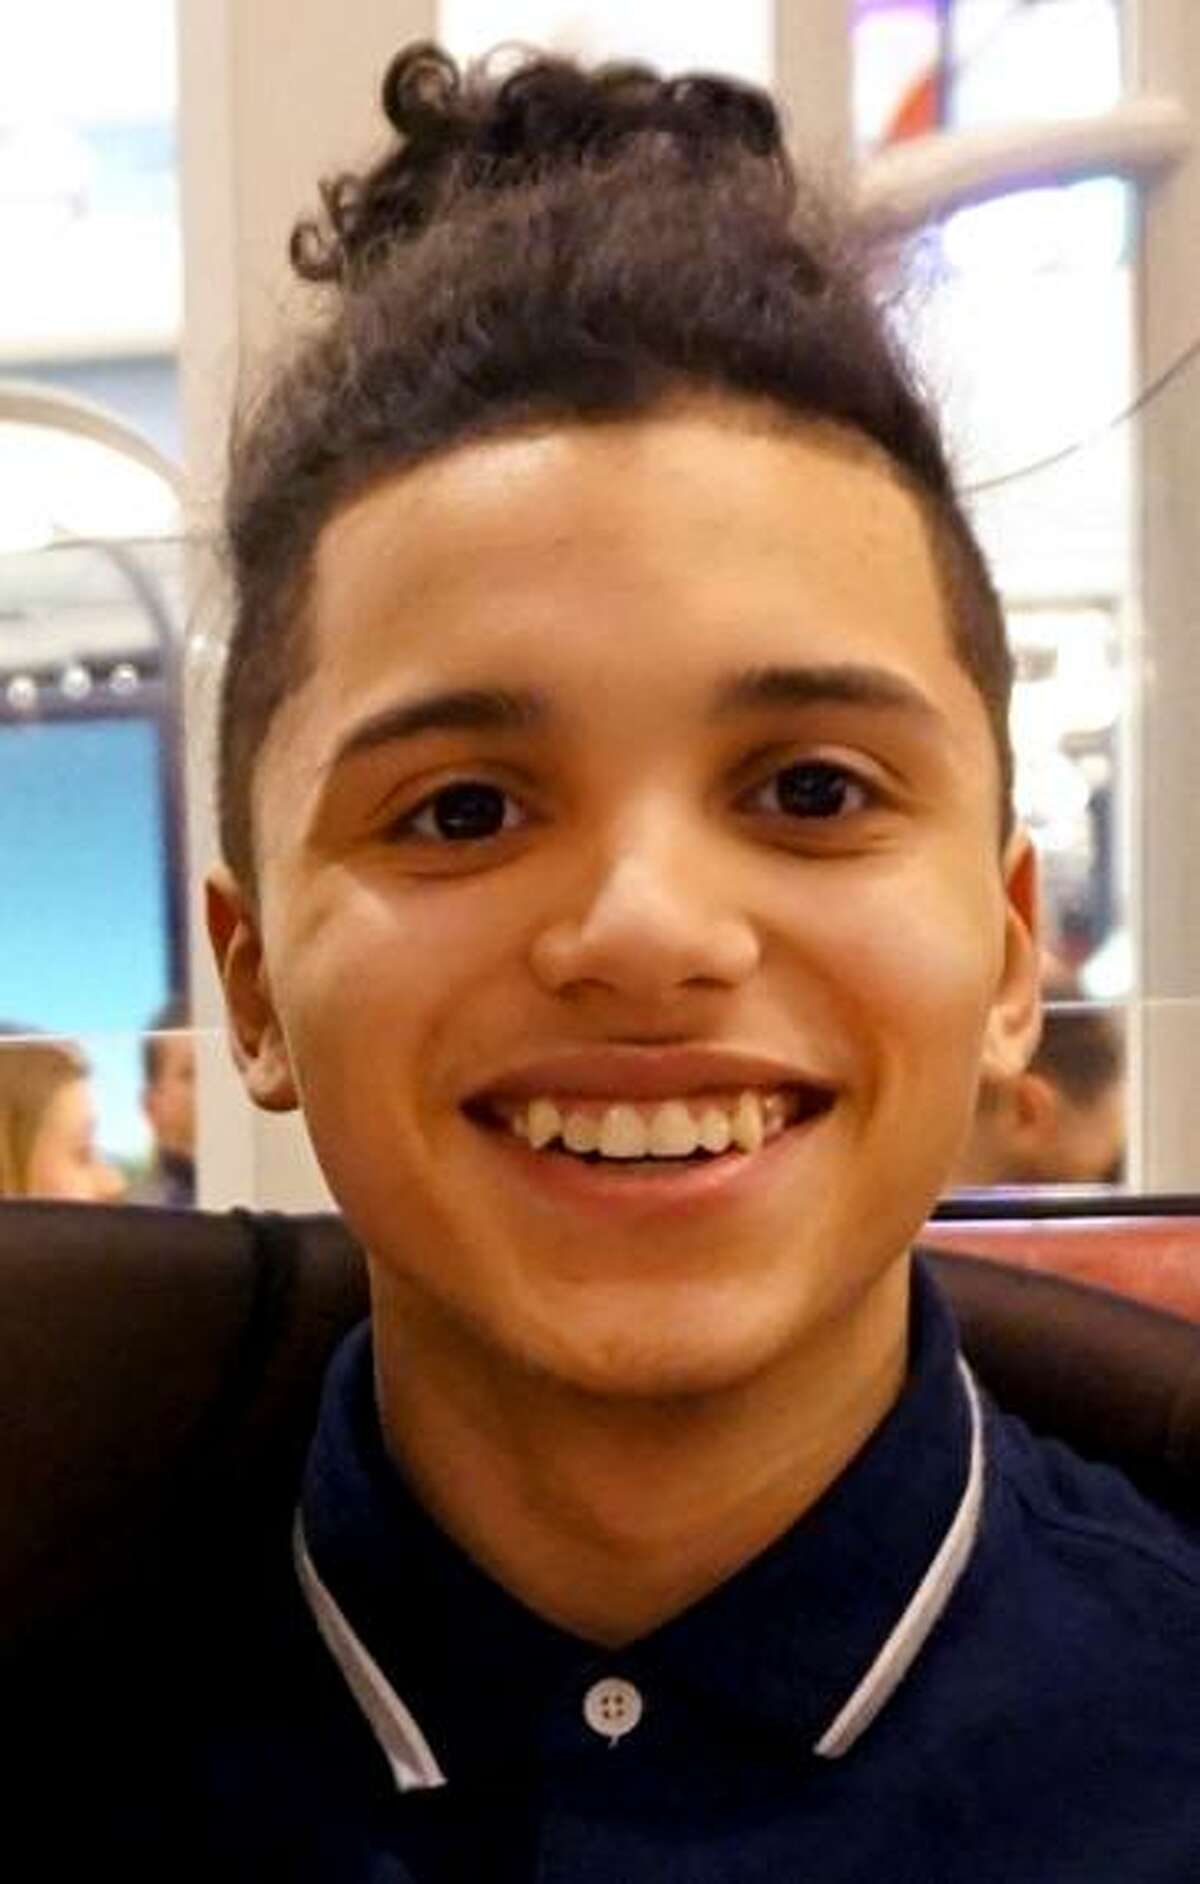 Relatives have identified 16-year-old Jayson Negron, of Bridgeport as the teen shot dead by police on Tuesday, May 10, 2017.